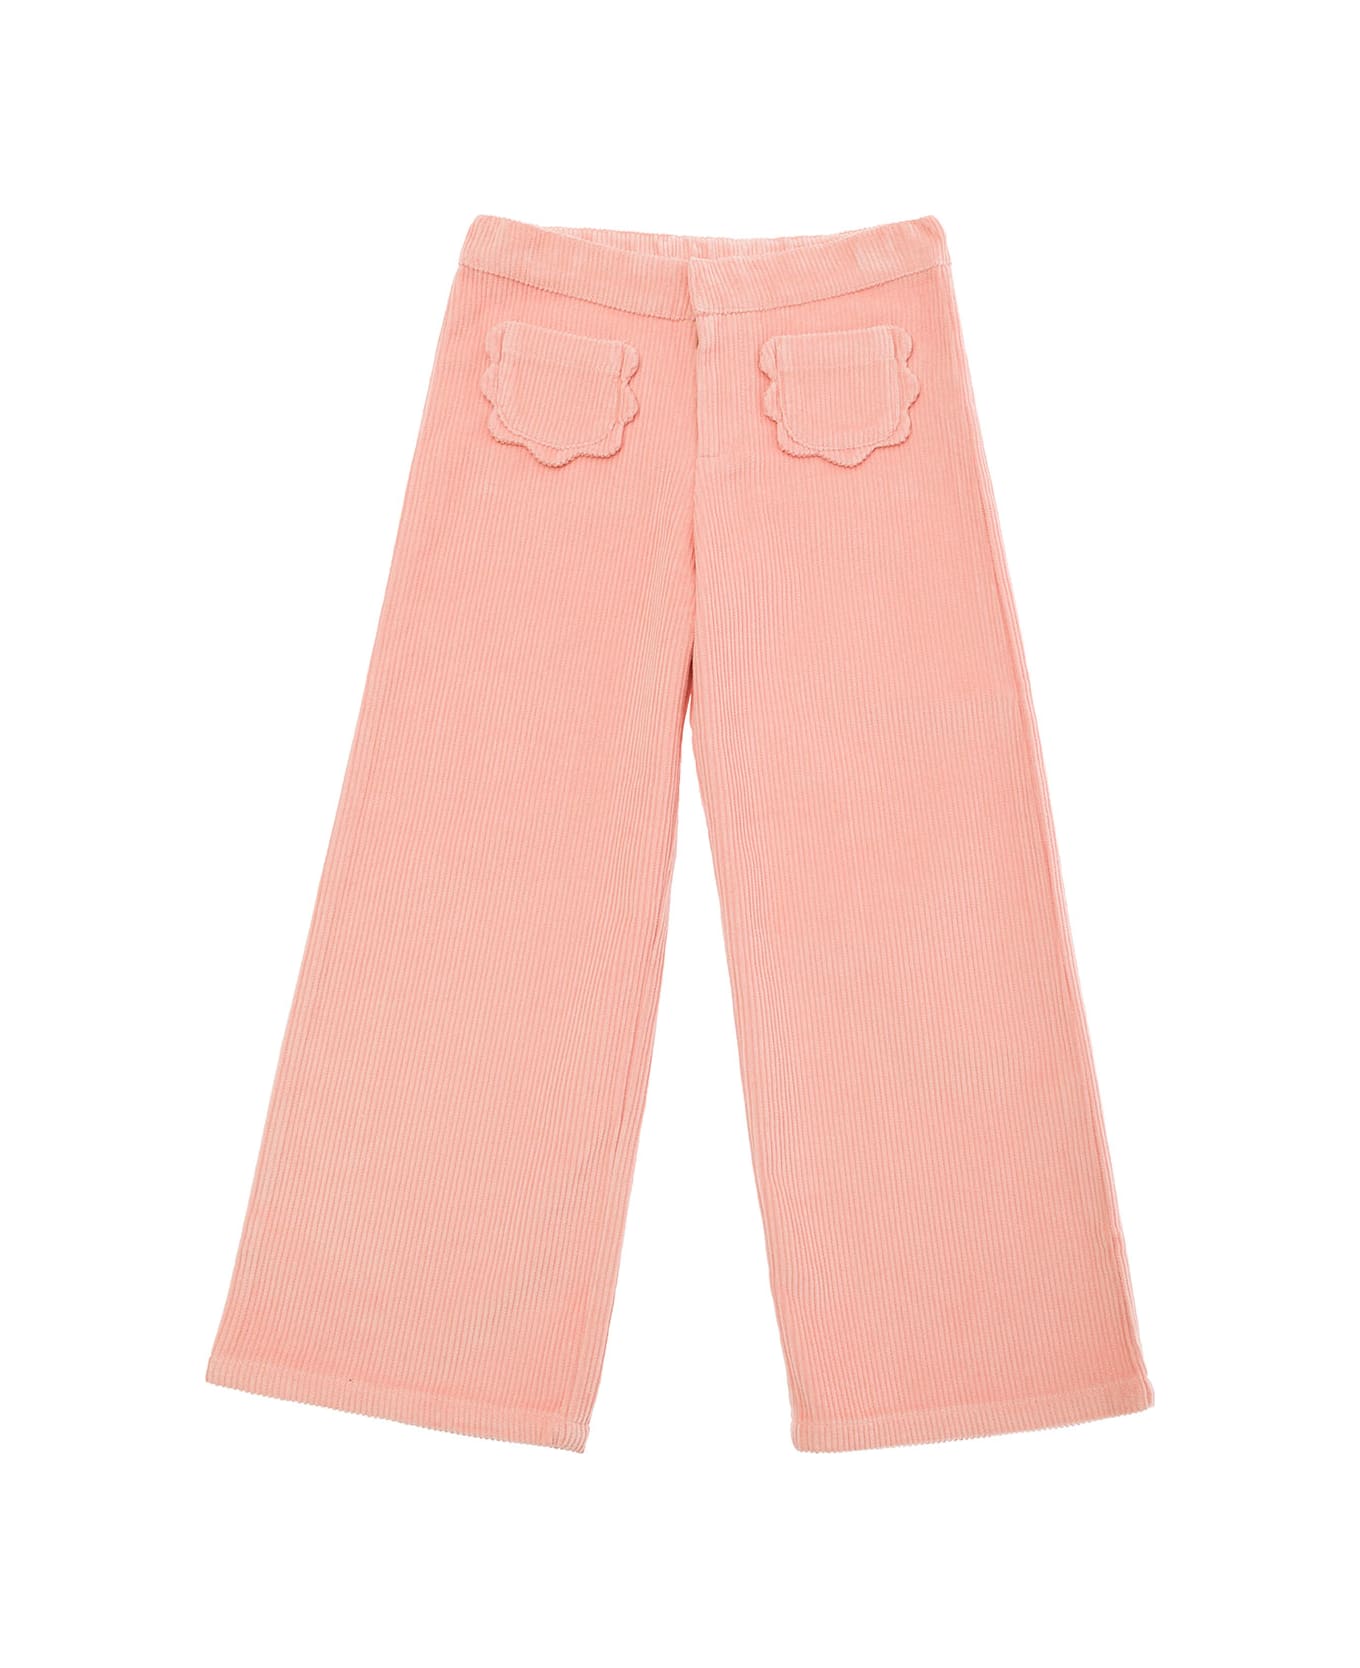 Emile Et Ida Pink Pants With Concealed Closure And Patch Pockets In Corduroy Girl - Pink ボトムス